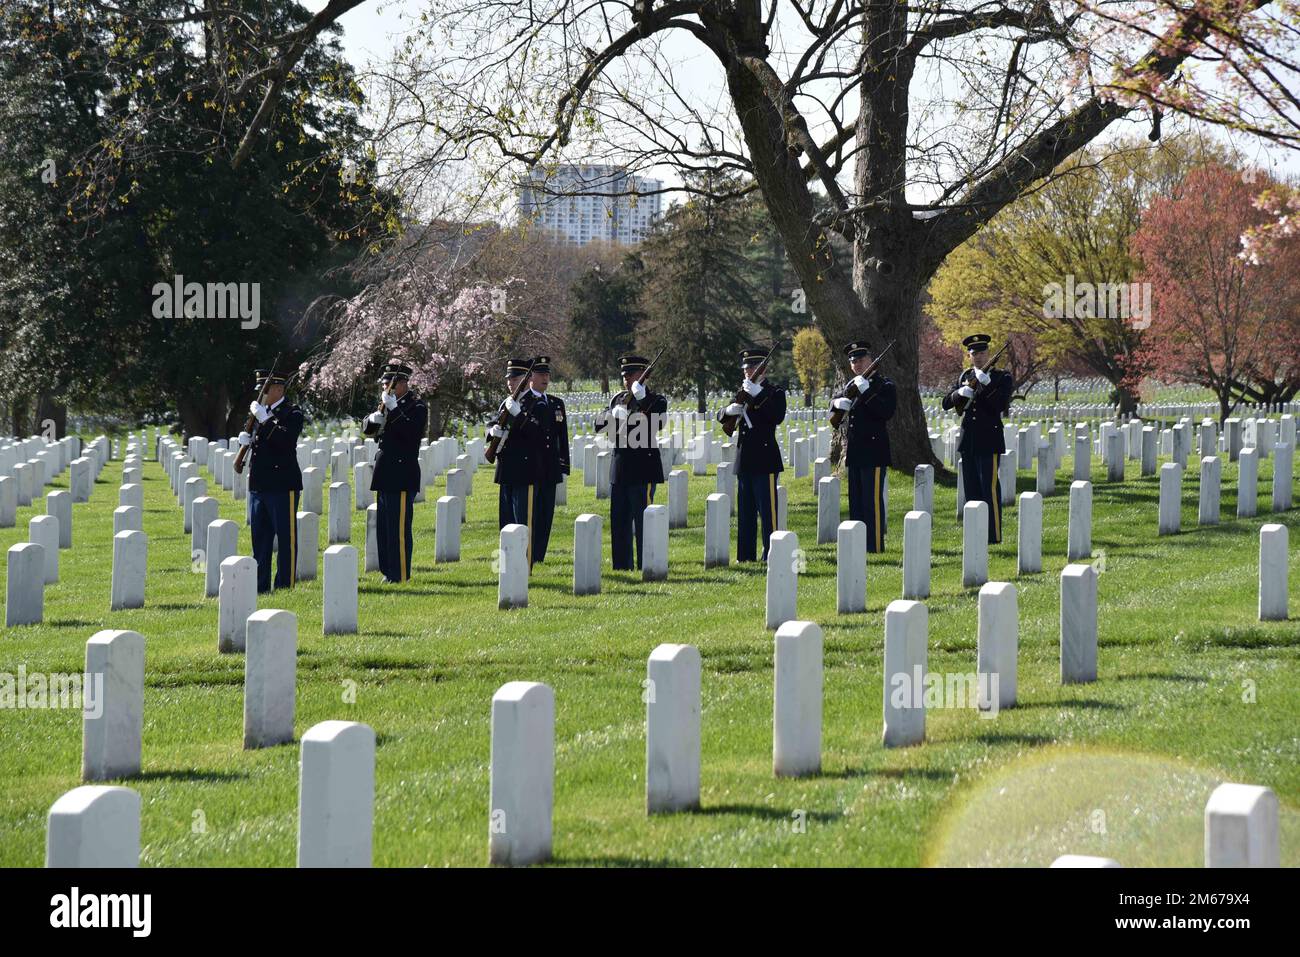 Army Cpl. Charles E. Lee, 18, of Cincinnati, killed during the Korean War, was laid to rest on April 11, 2022, at Arlington National Cemetery, Arlington, Virginia. The Defense POW/MIA Accounting Agency accounted for Lee on June 14, 2021.    In July 1950, Lee was a member of Company K, 3rd Battalion, 34th Infantry Regiment, 24th Infantry Division. He was reported missing in action on July 20 after his unit was forced to retreat from the vicinity of Taejon, South Korea. He was never found, nor were any remains recovered that could be identified as Lee. He was declared non-recoverable in January Stock Photo